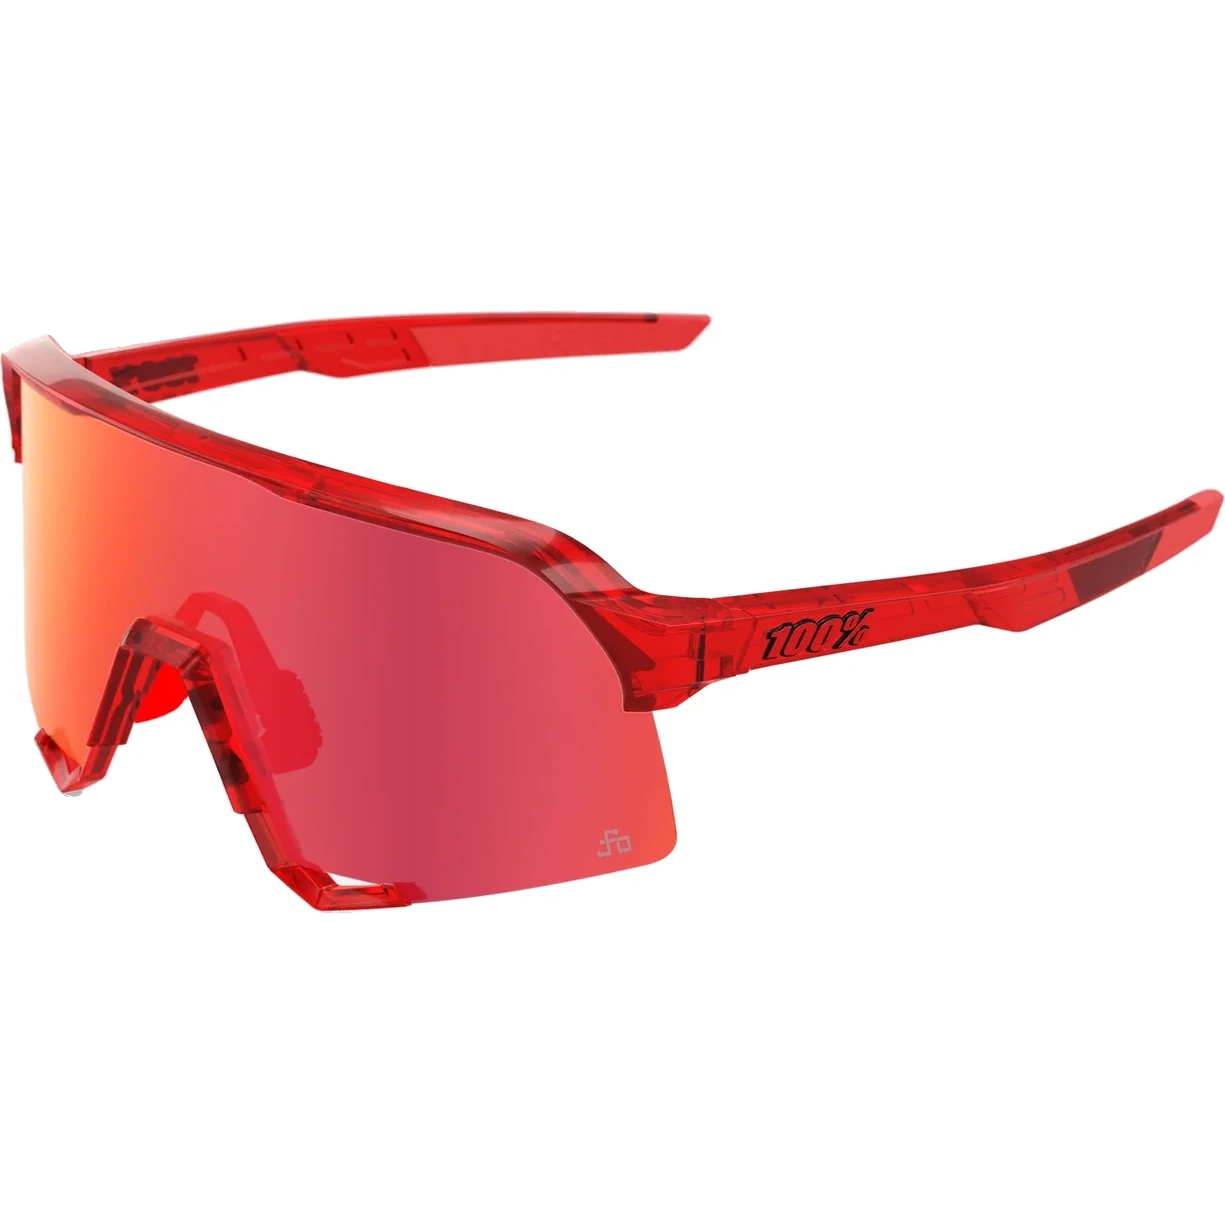 Picture of 100% S3 LE Glasses - HiPER Red Mirror Lens - Peter Sagan Limited Edition - Translucent Red